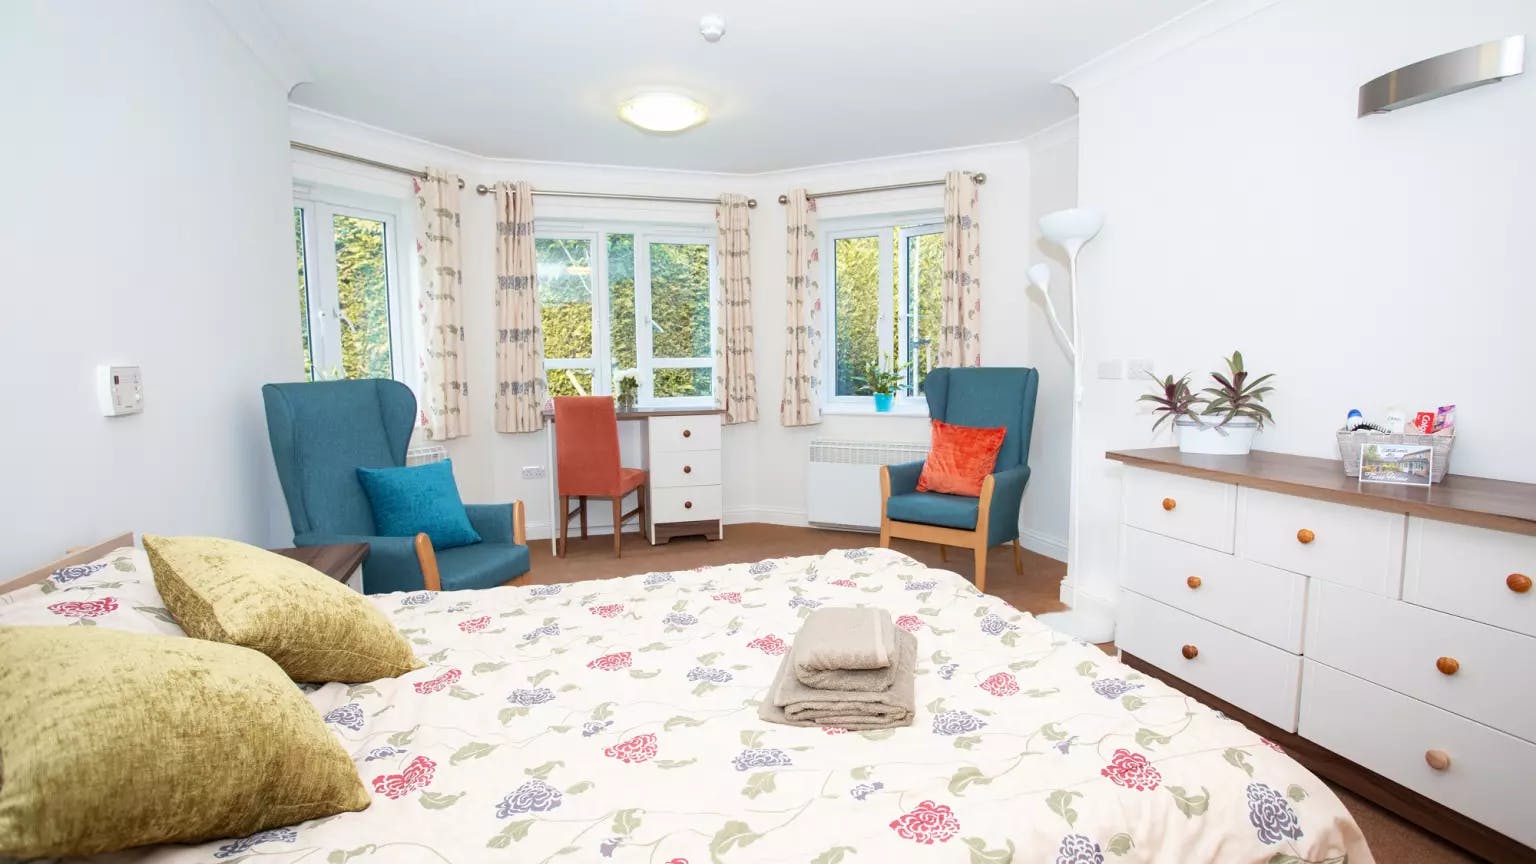 Bedroom of Fosse House care home in St Albans, Hertfordshire